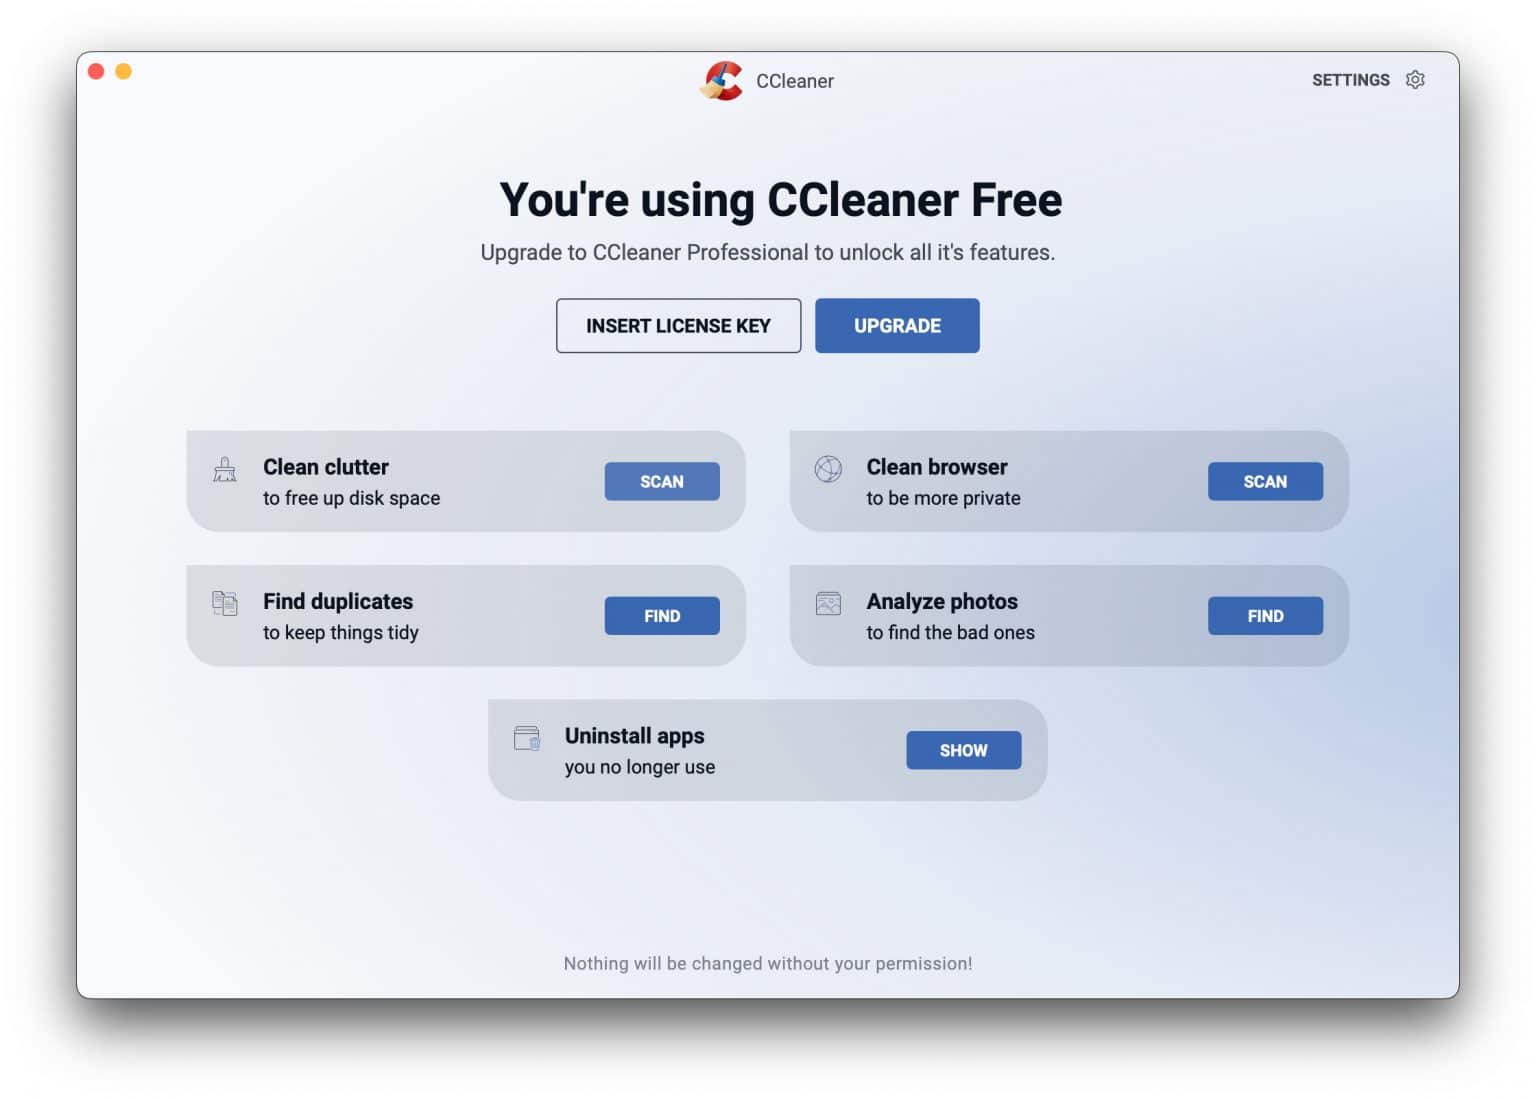 ccleaner cloud windows 10 was removed